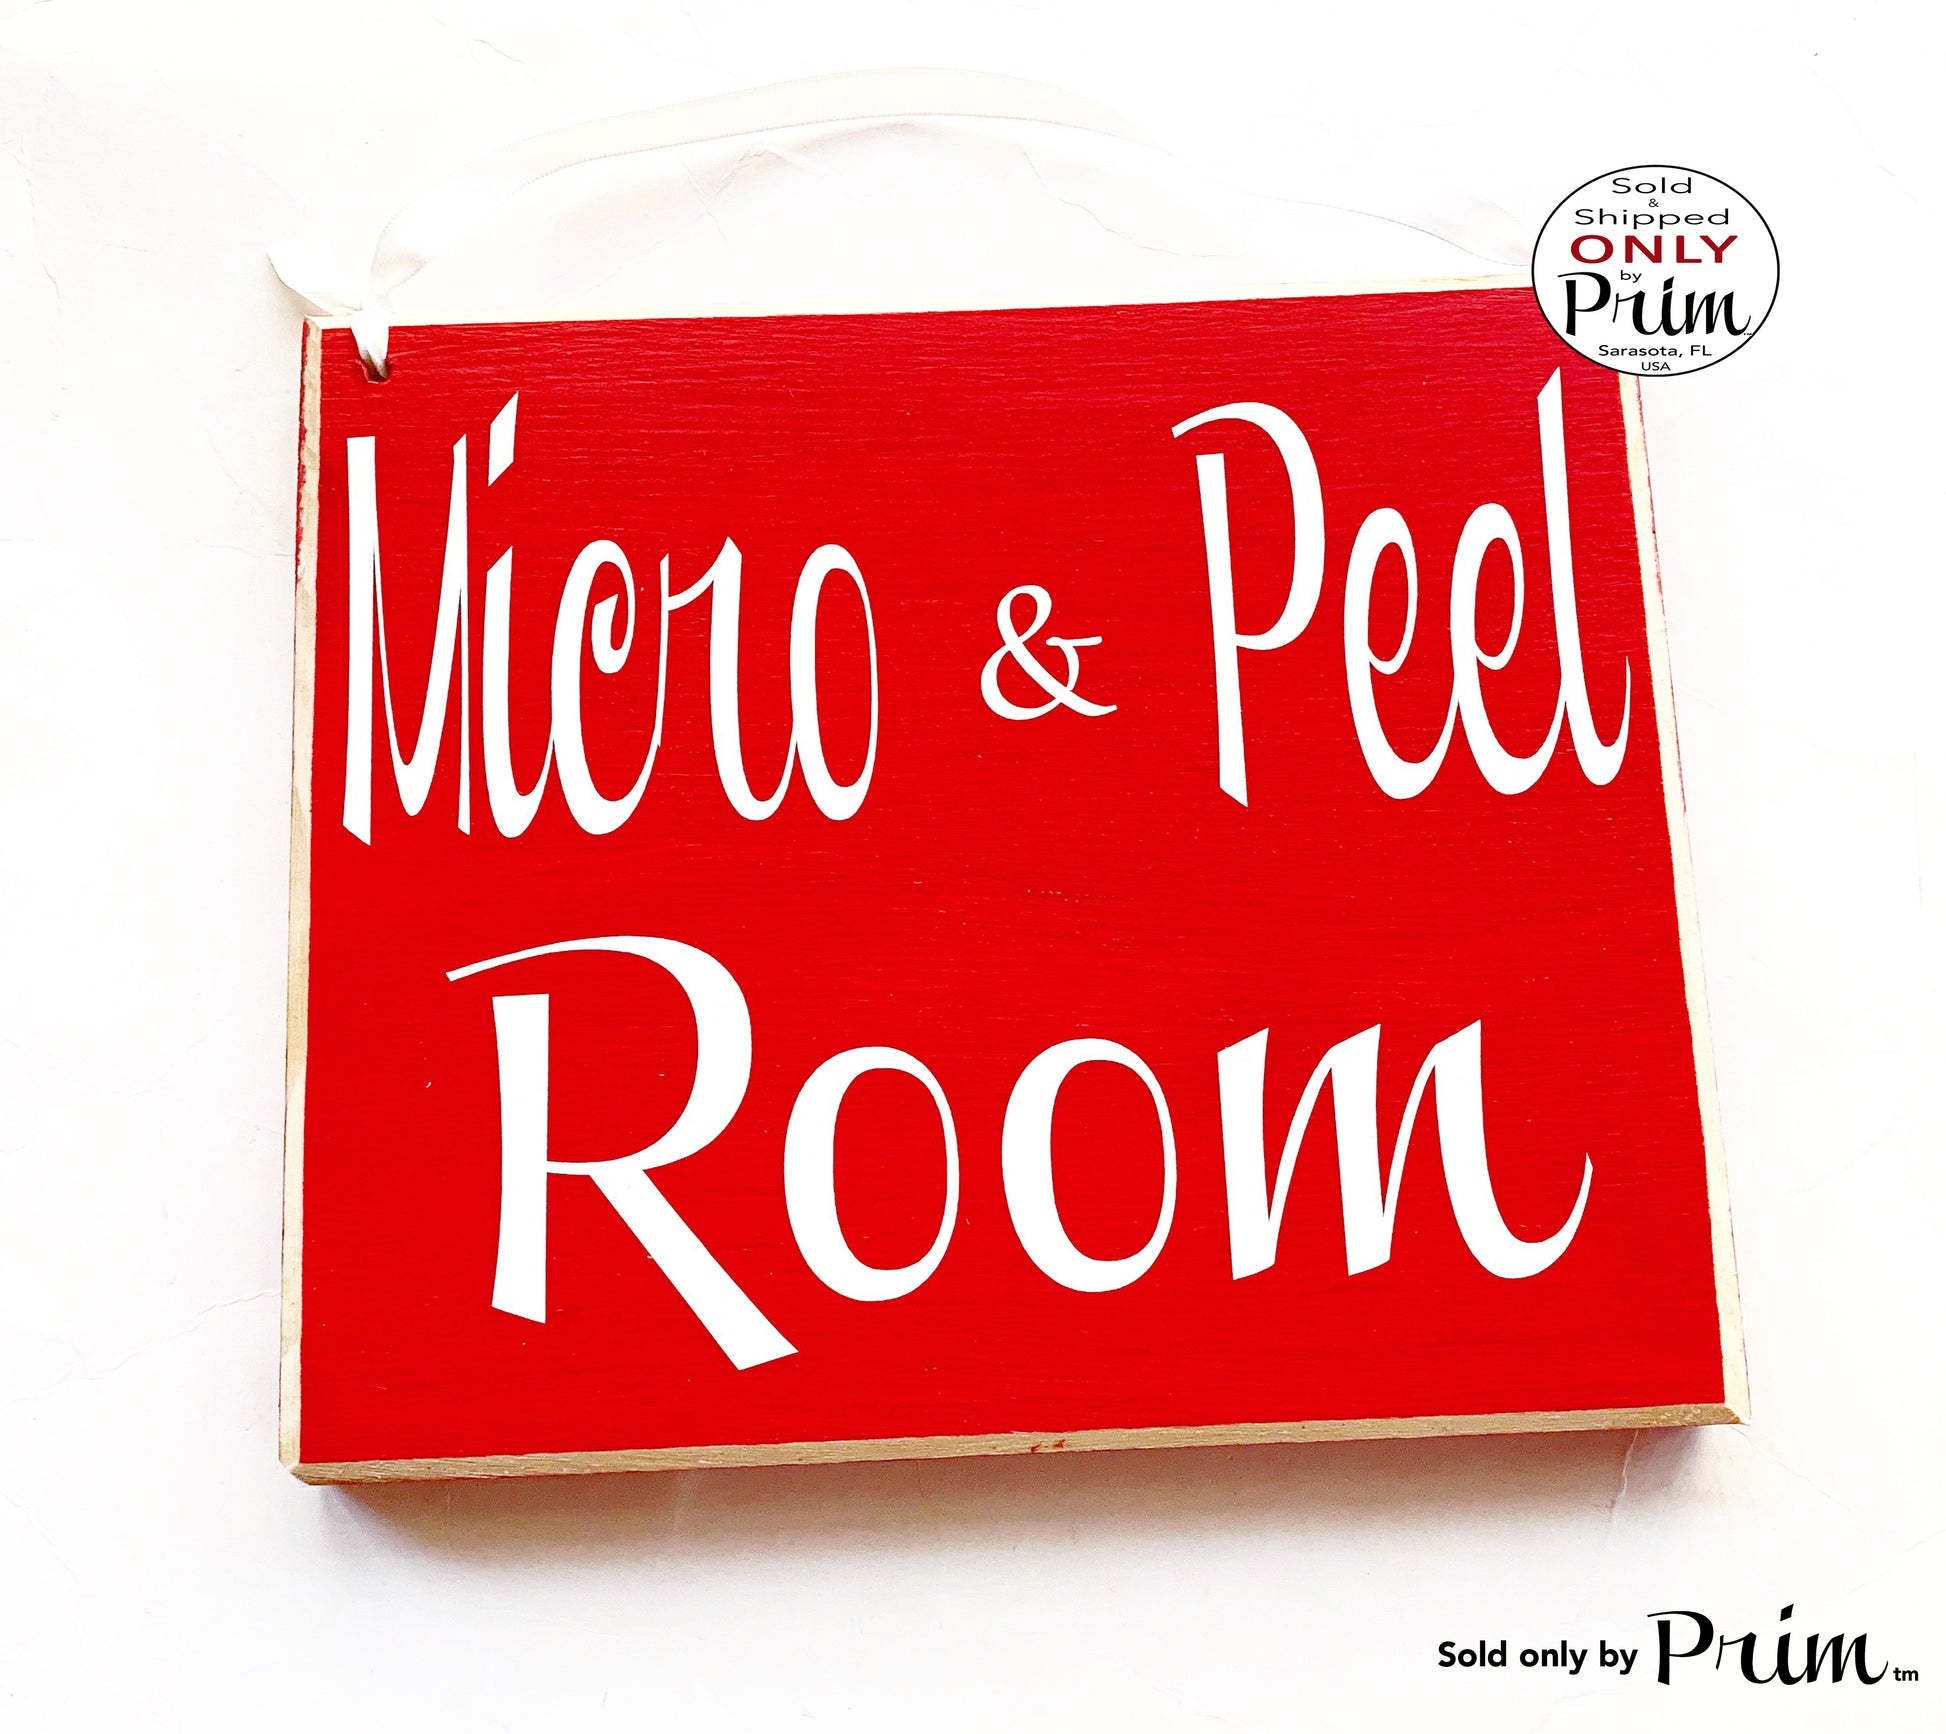 Micro and Peel Room Custom Wood Sign | Facial Aesthetics Salon In Session Microdermabrasion Please Do Not Disturb Wall Door Hanger Plaque